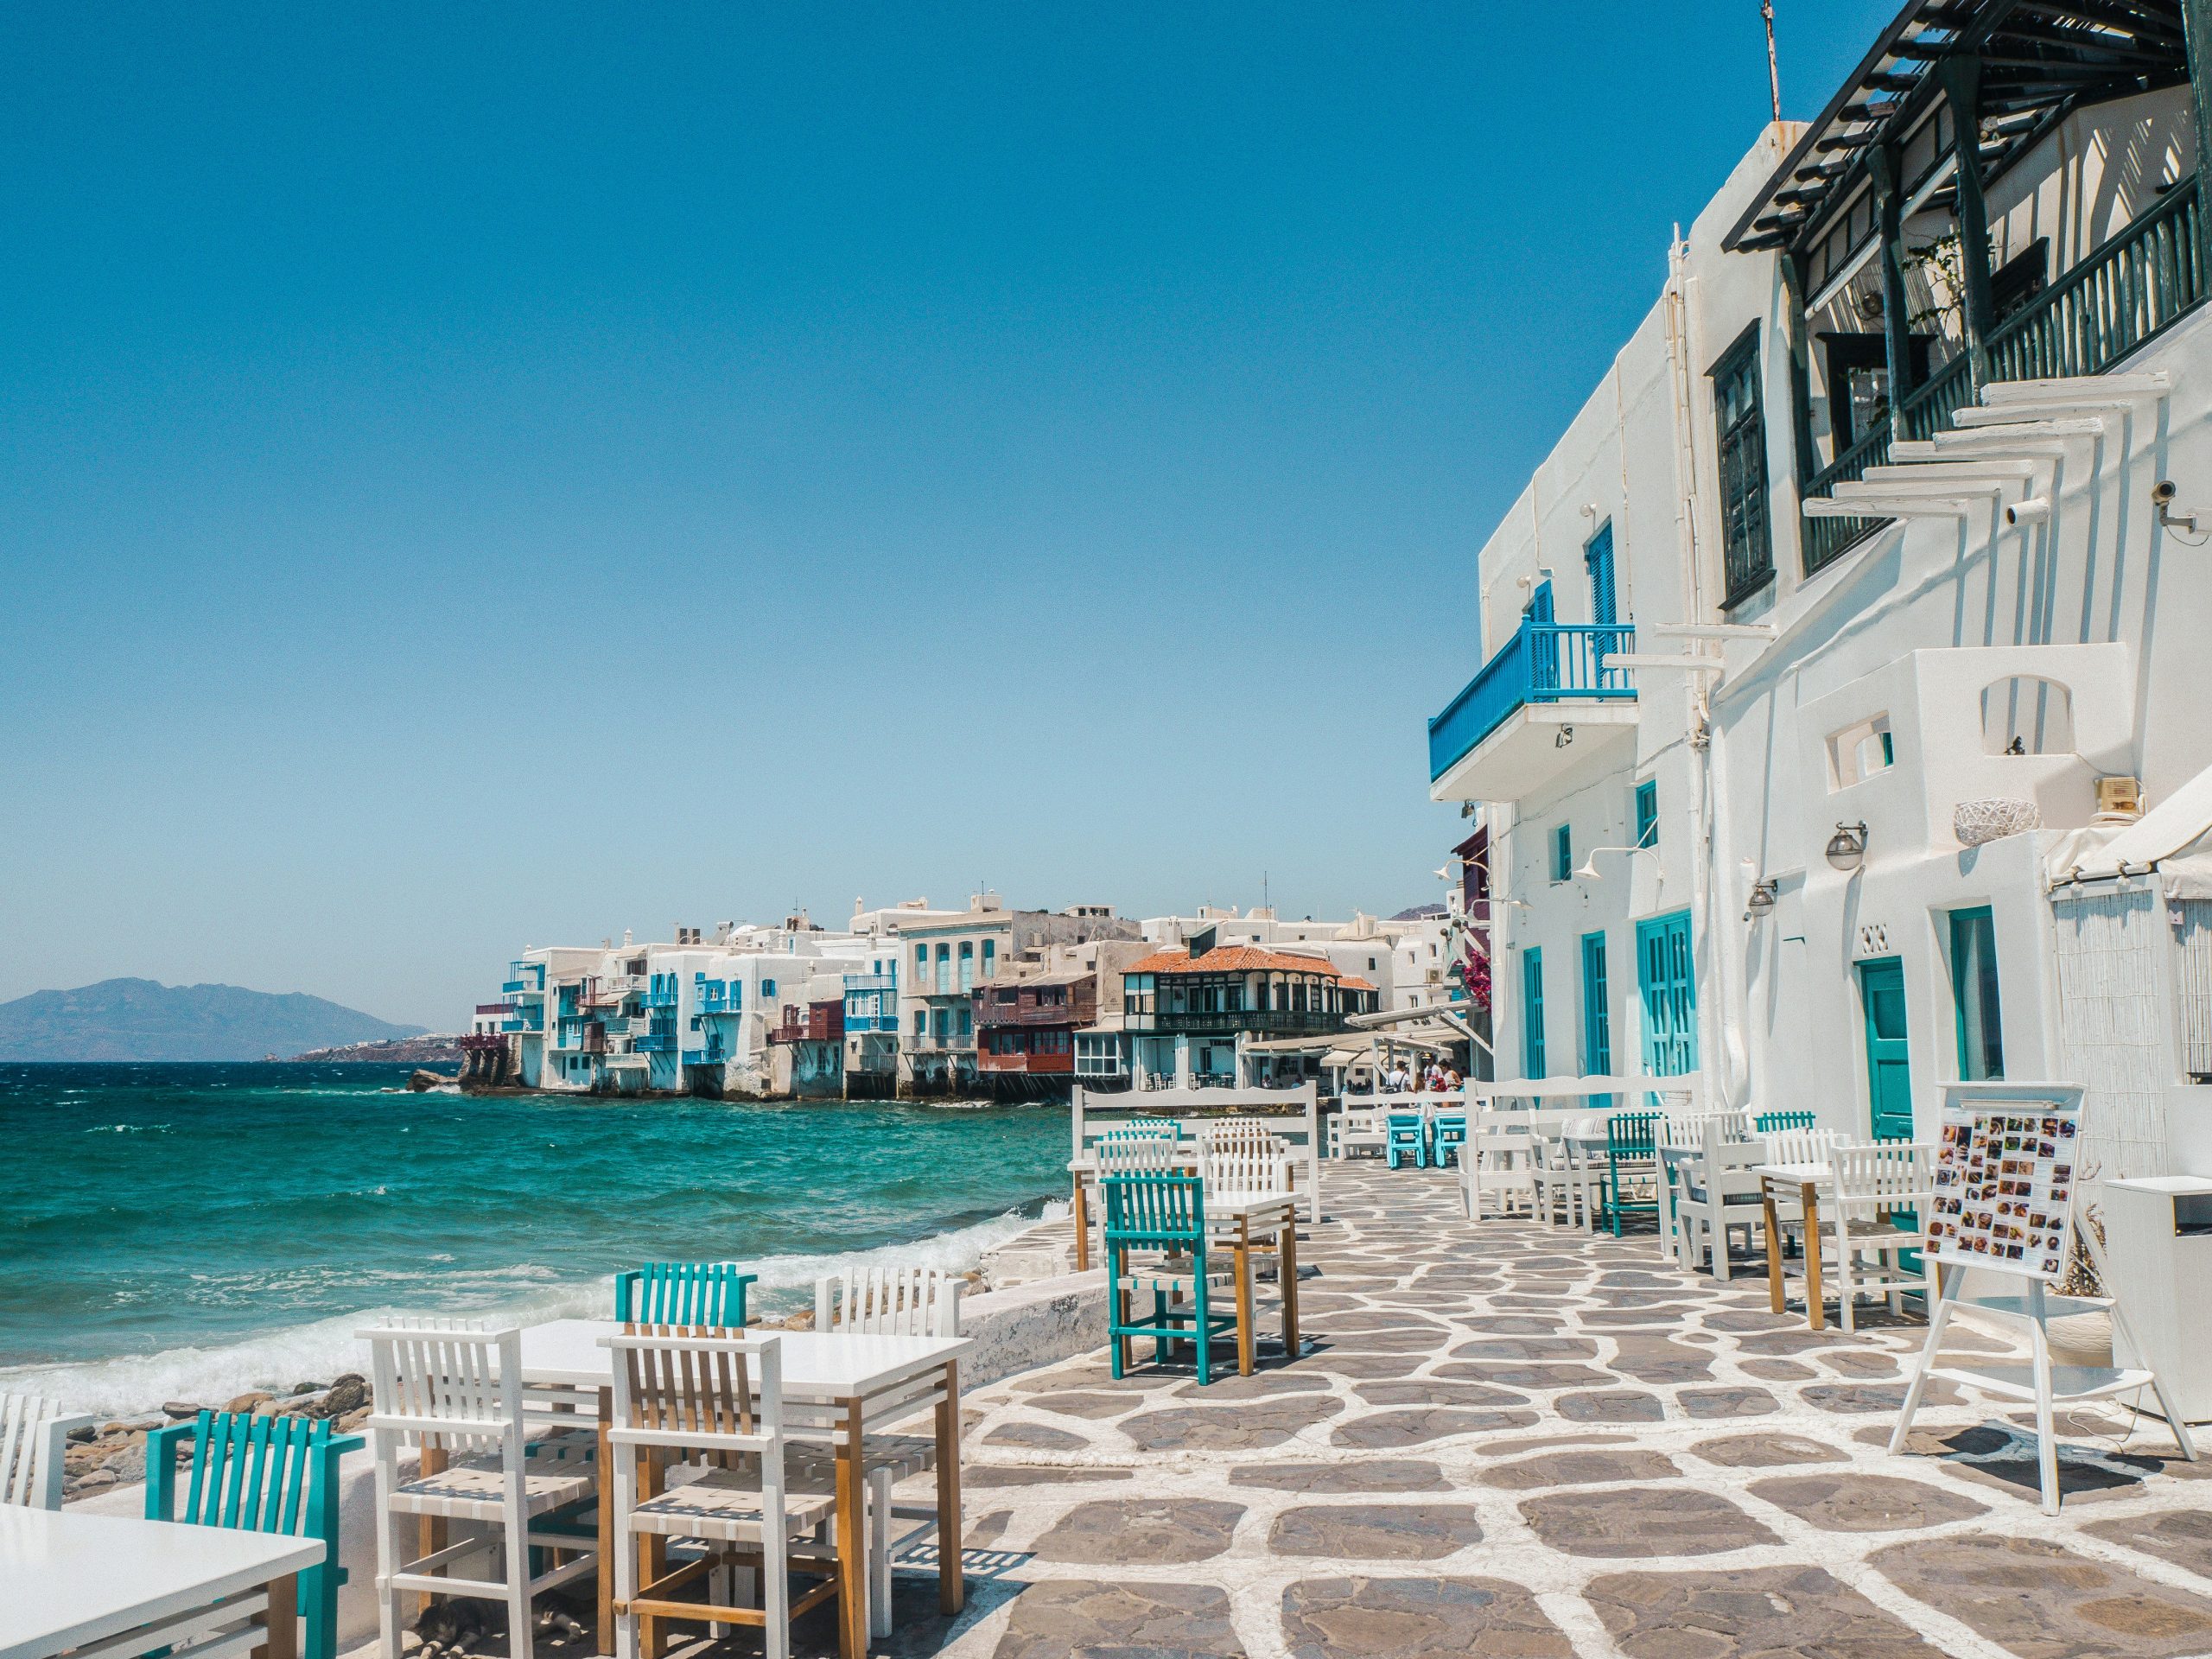 discover the beauty and charm of the greek islands, from crystal-clear waters to iconic white-washed buildings, and explore the rich history and culture of this stunning mediterranean destination.